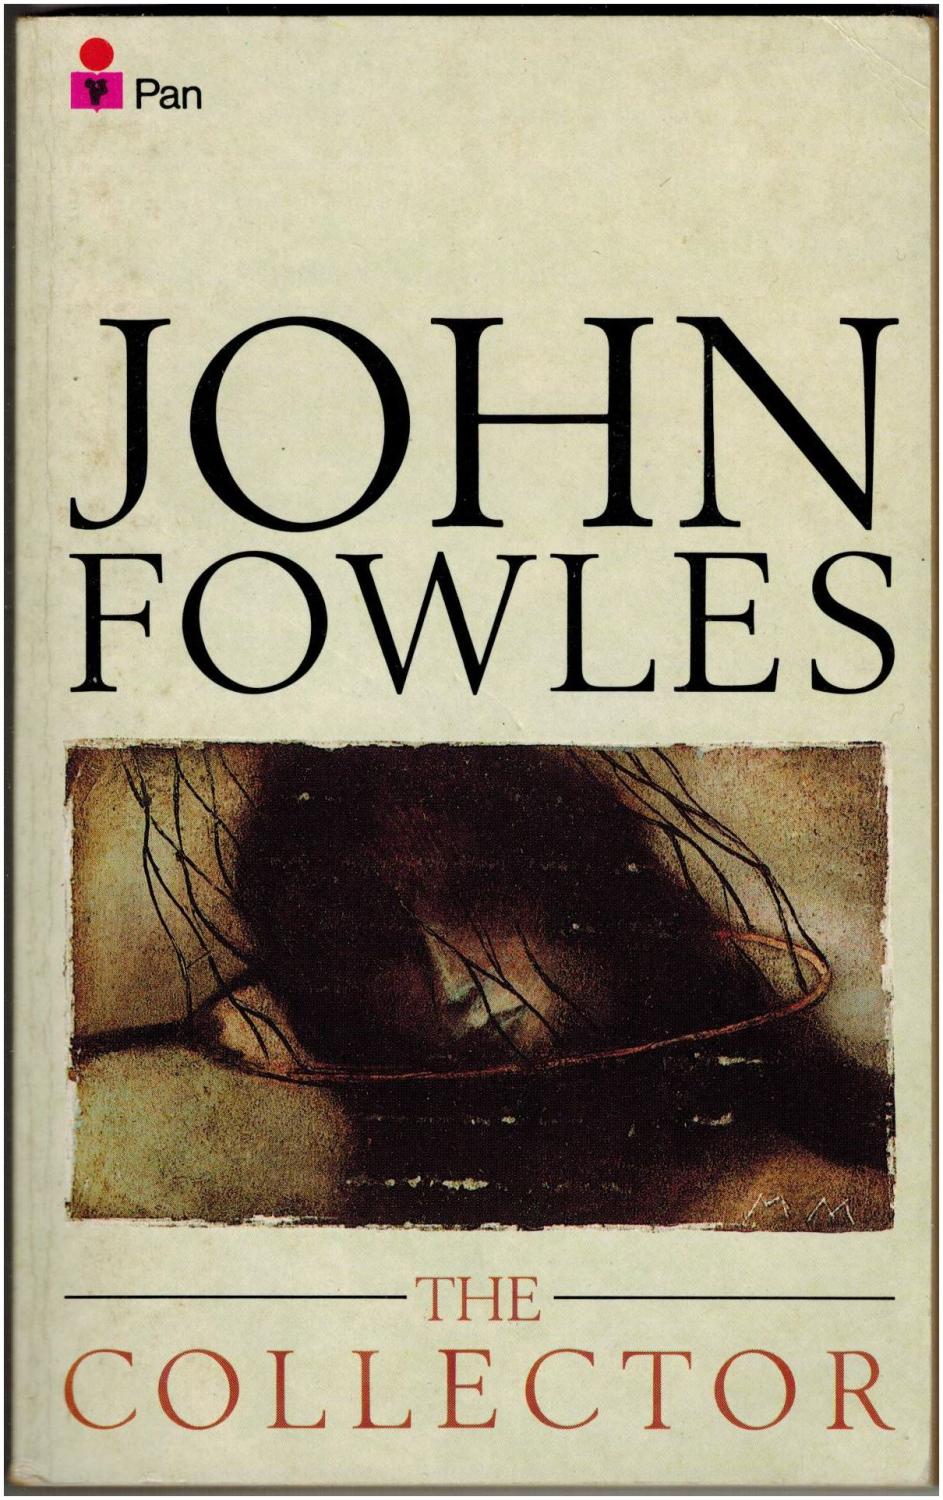 The Collector by John Fowles